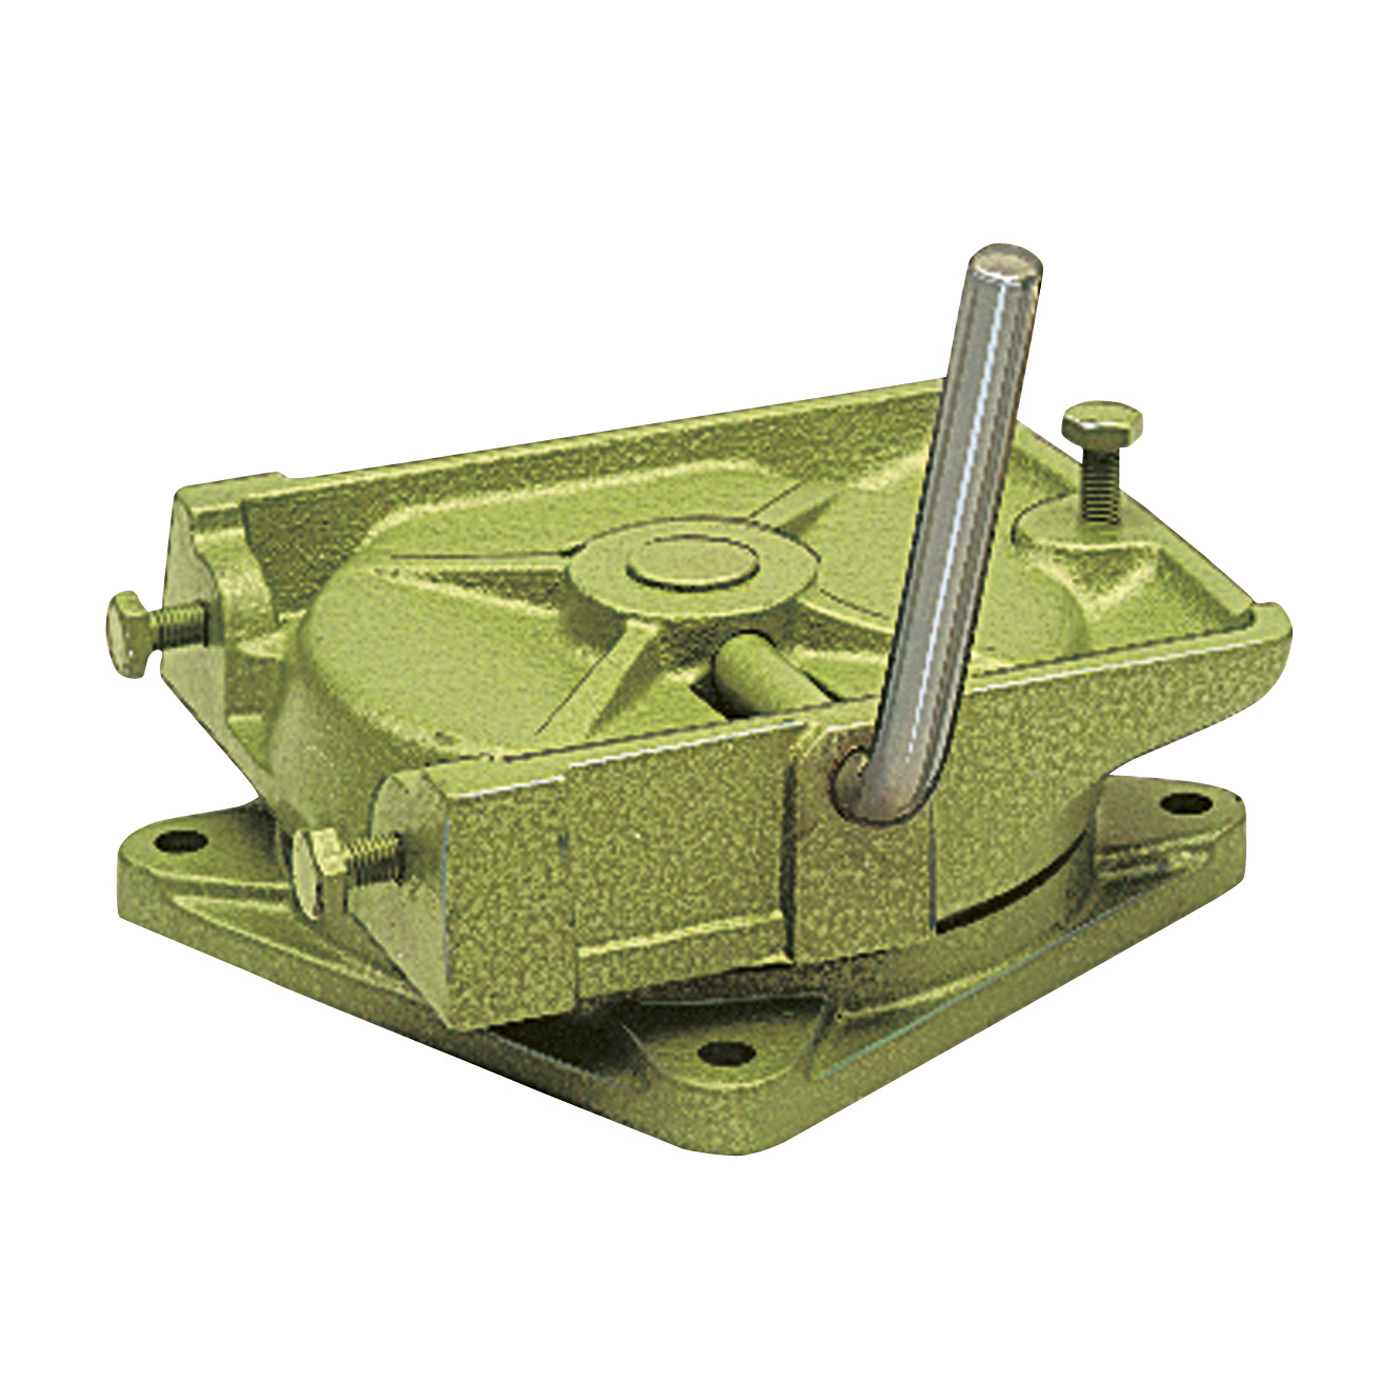 Turntable, for Parallel Vice Jaw Width 80 mm - 1 piece